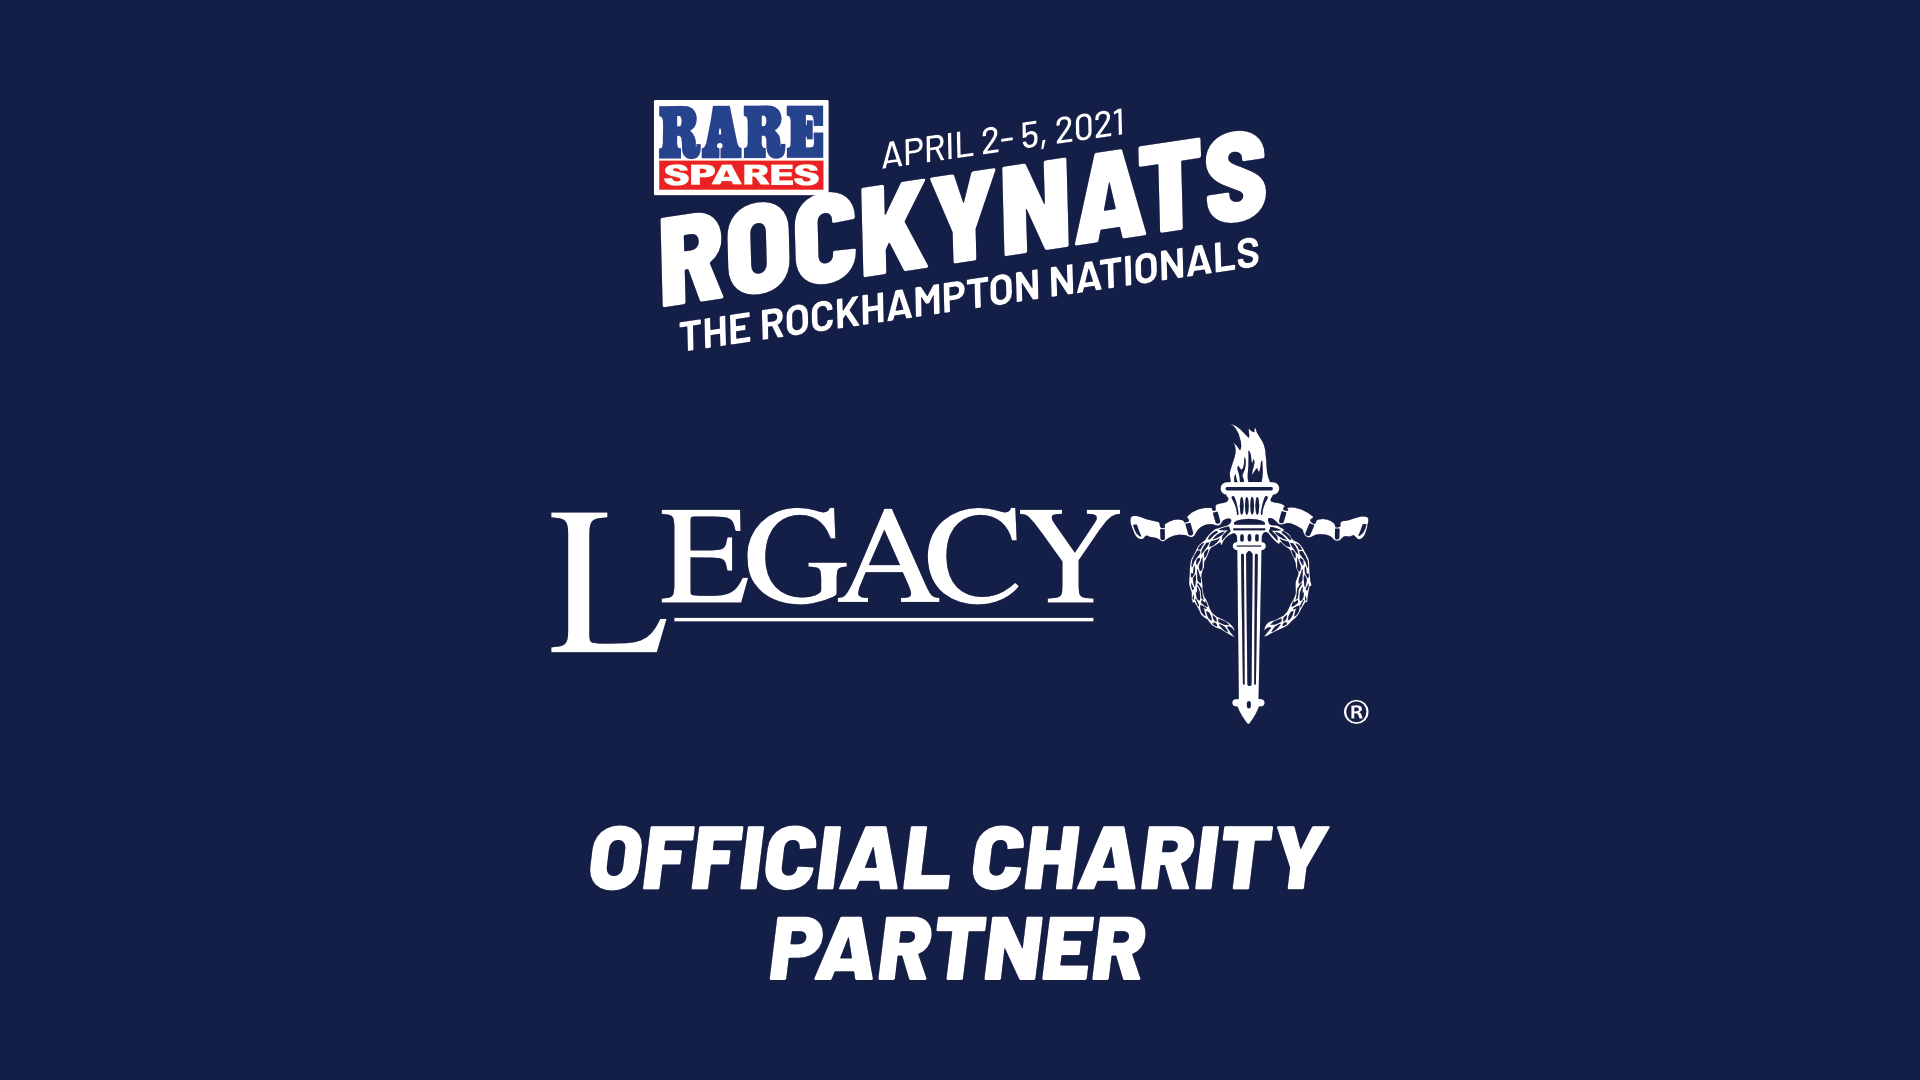 Legacy announced as Official Charity Partner of Rockynats 2021